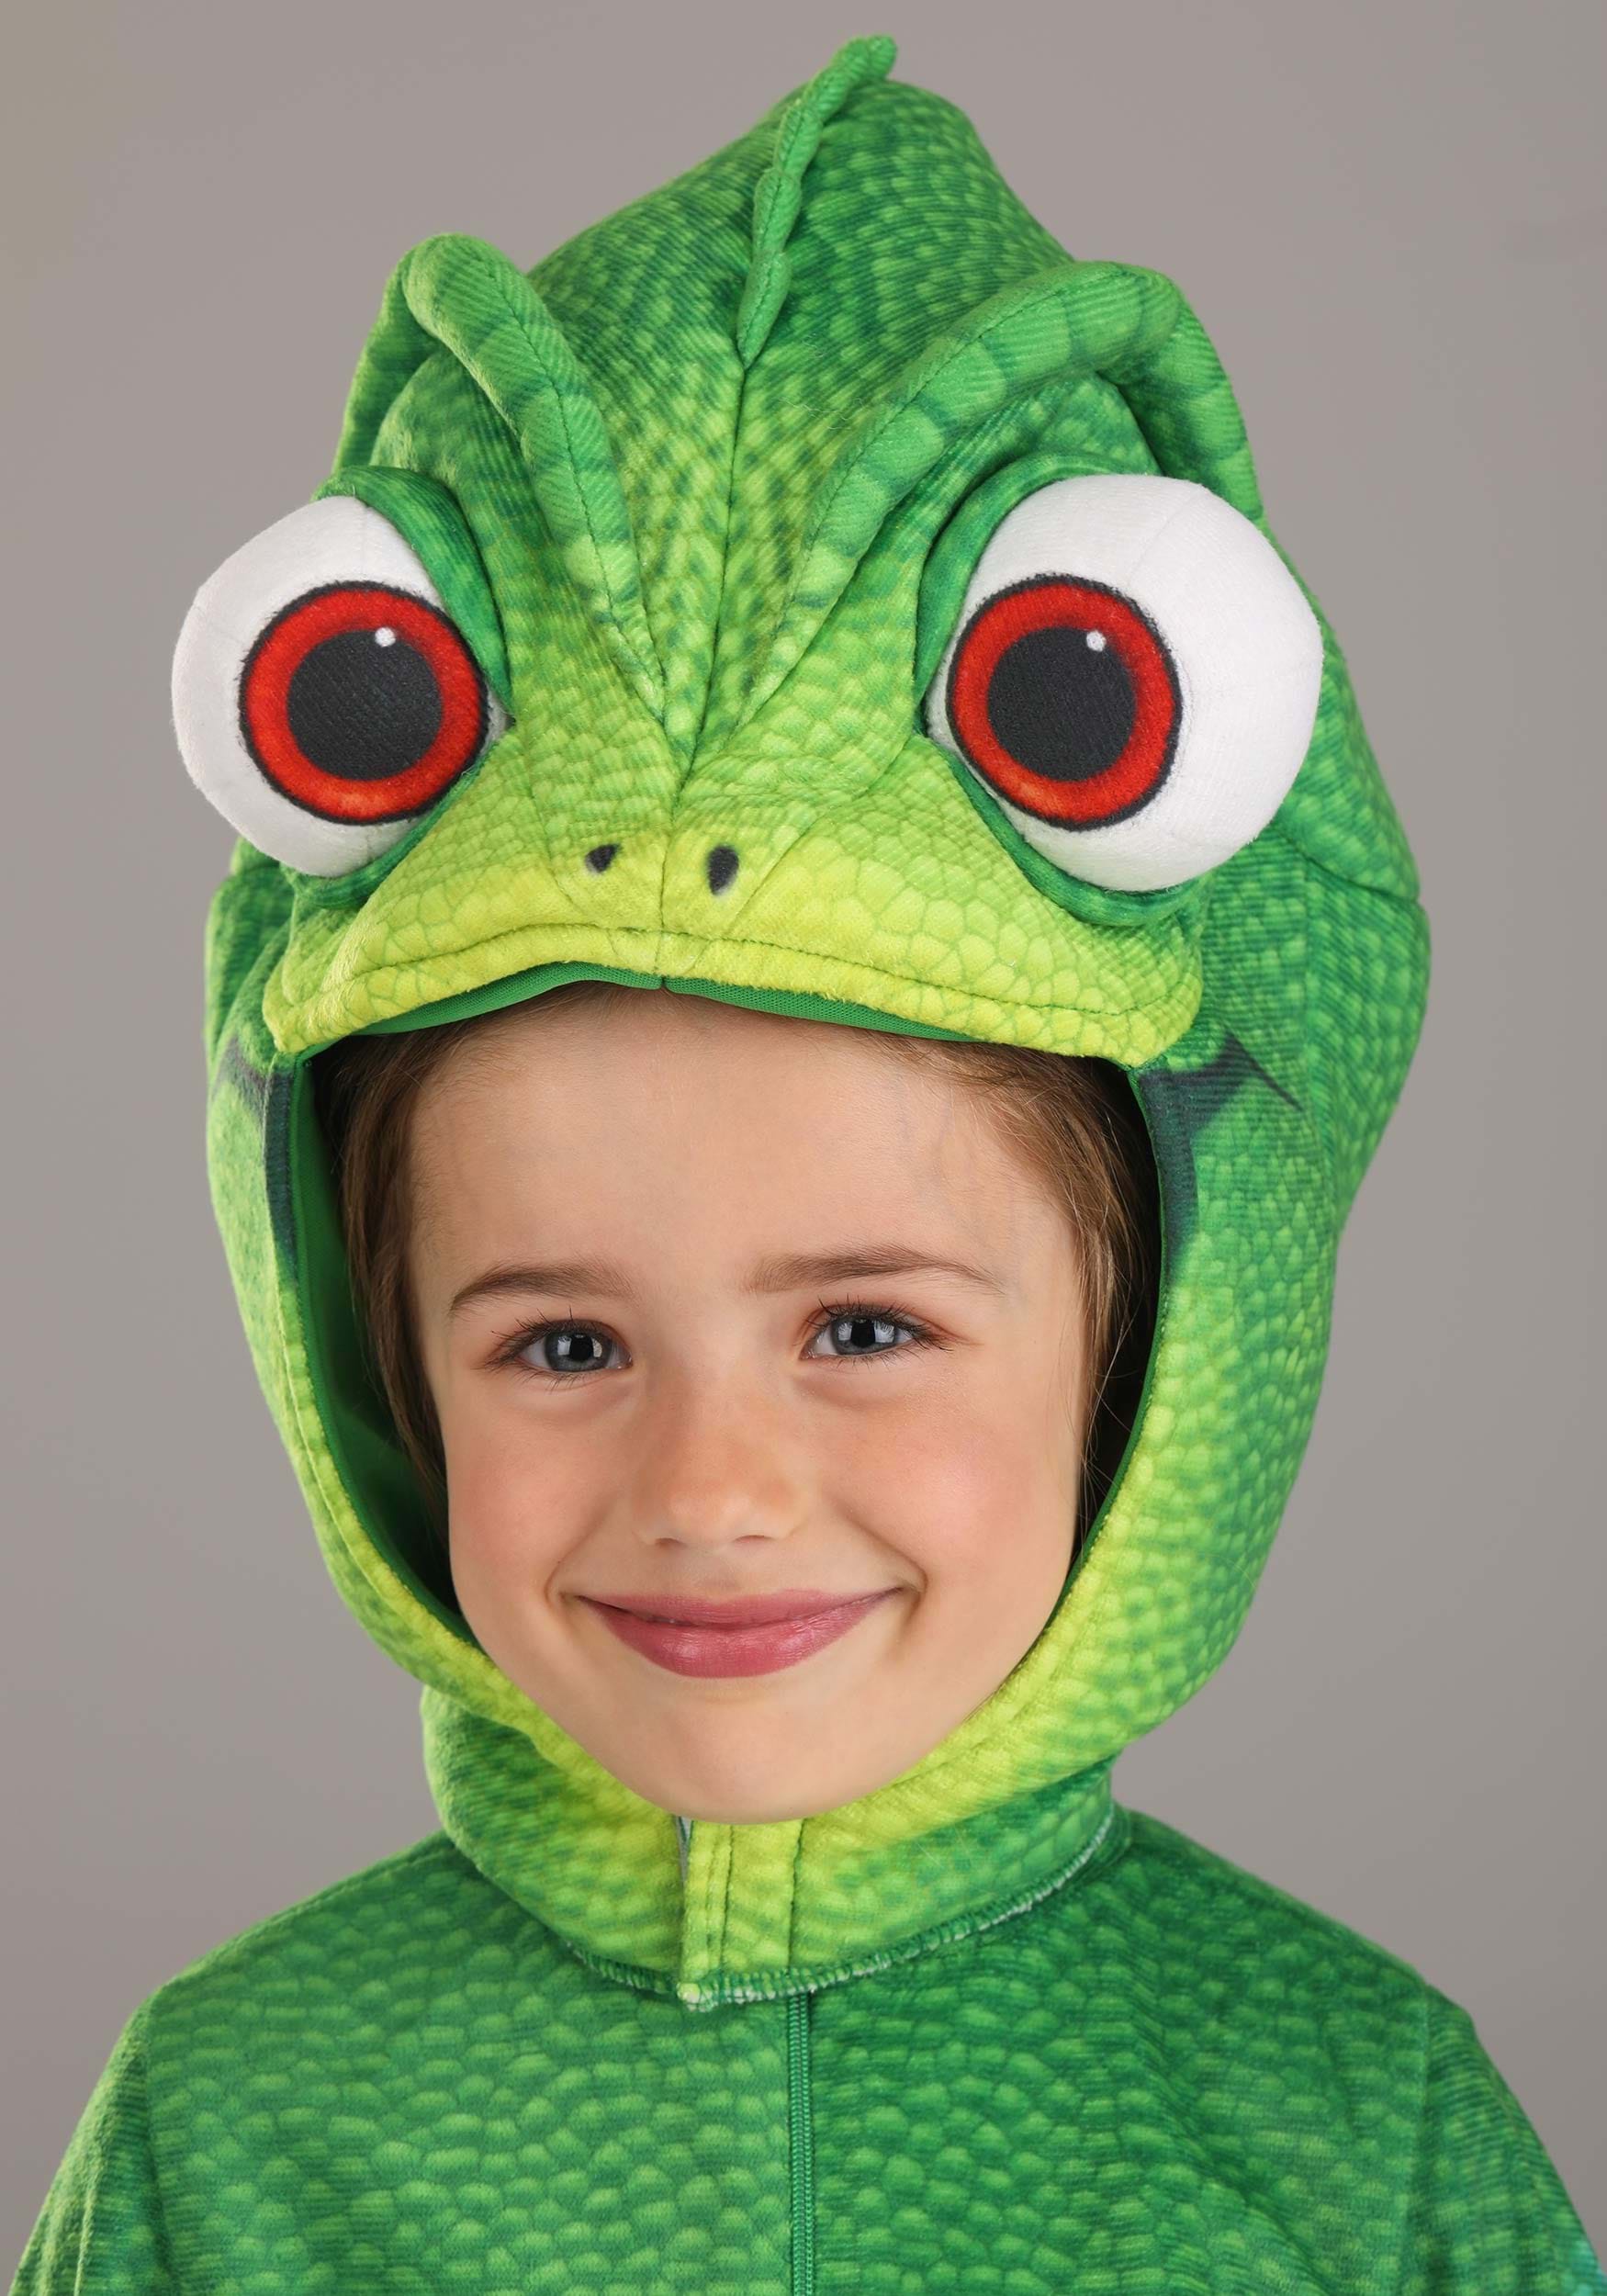 Pascal Tangled Costume for Toddlers